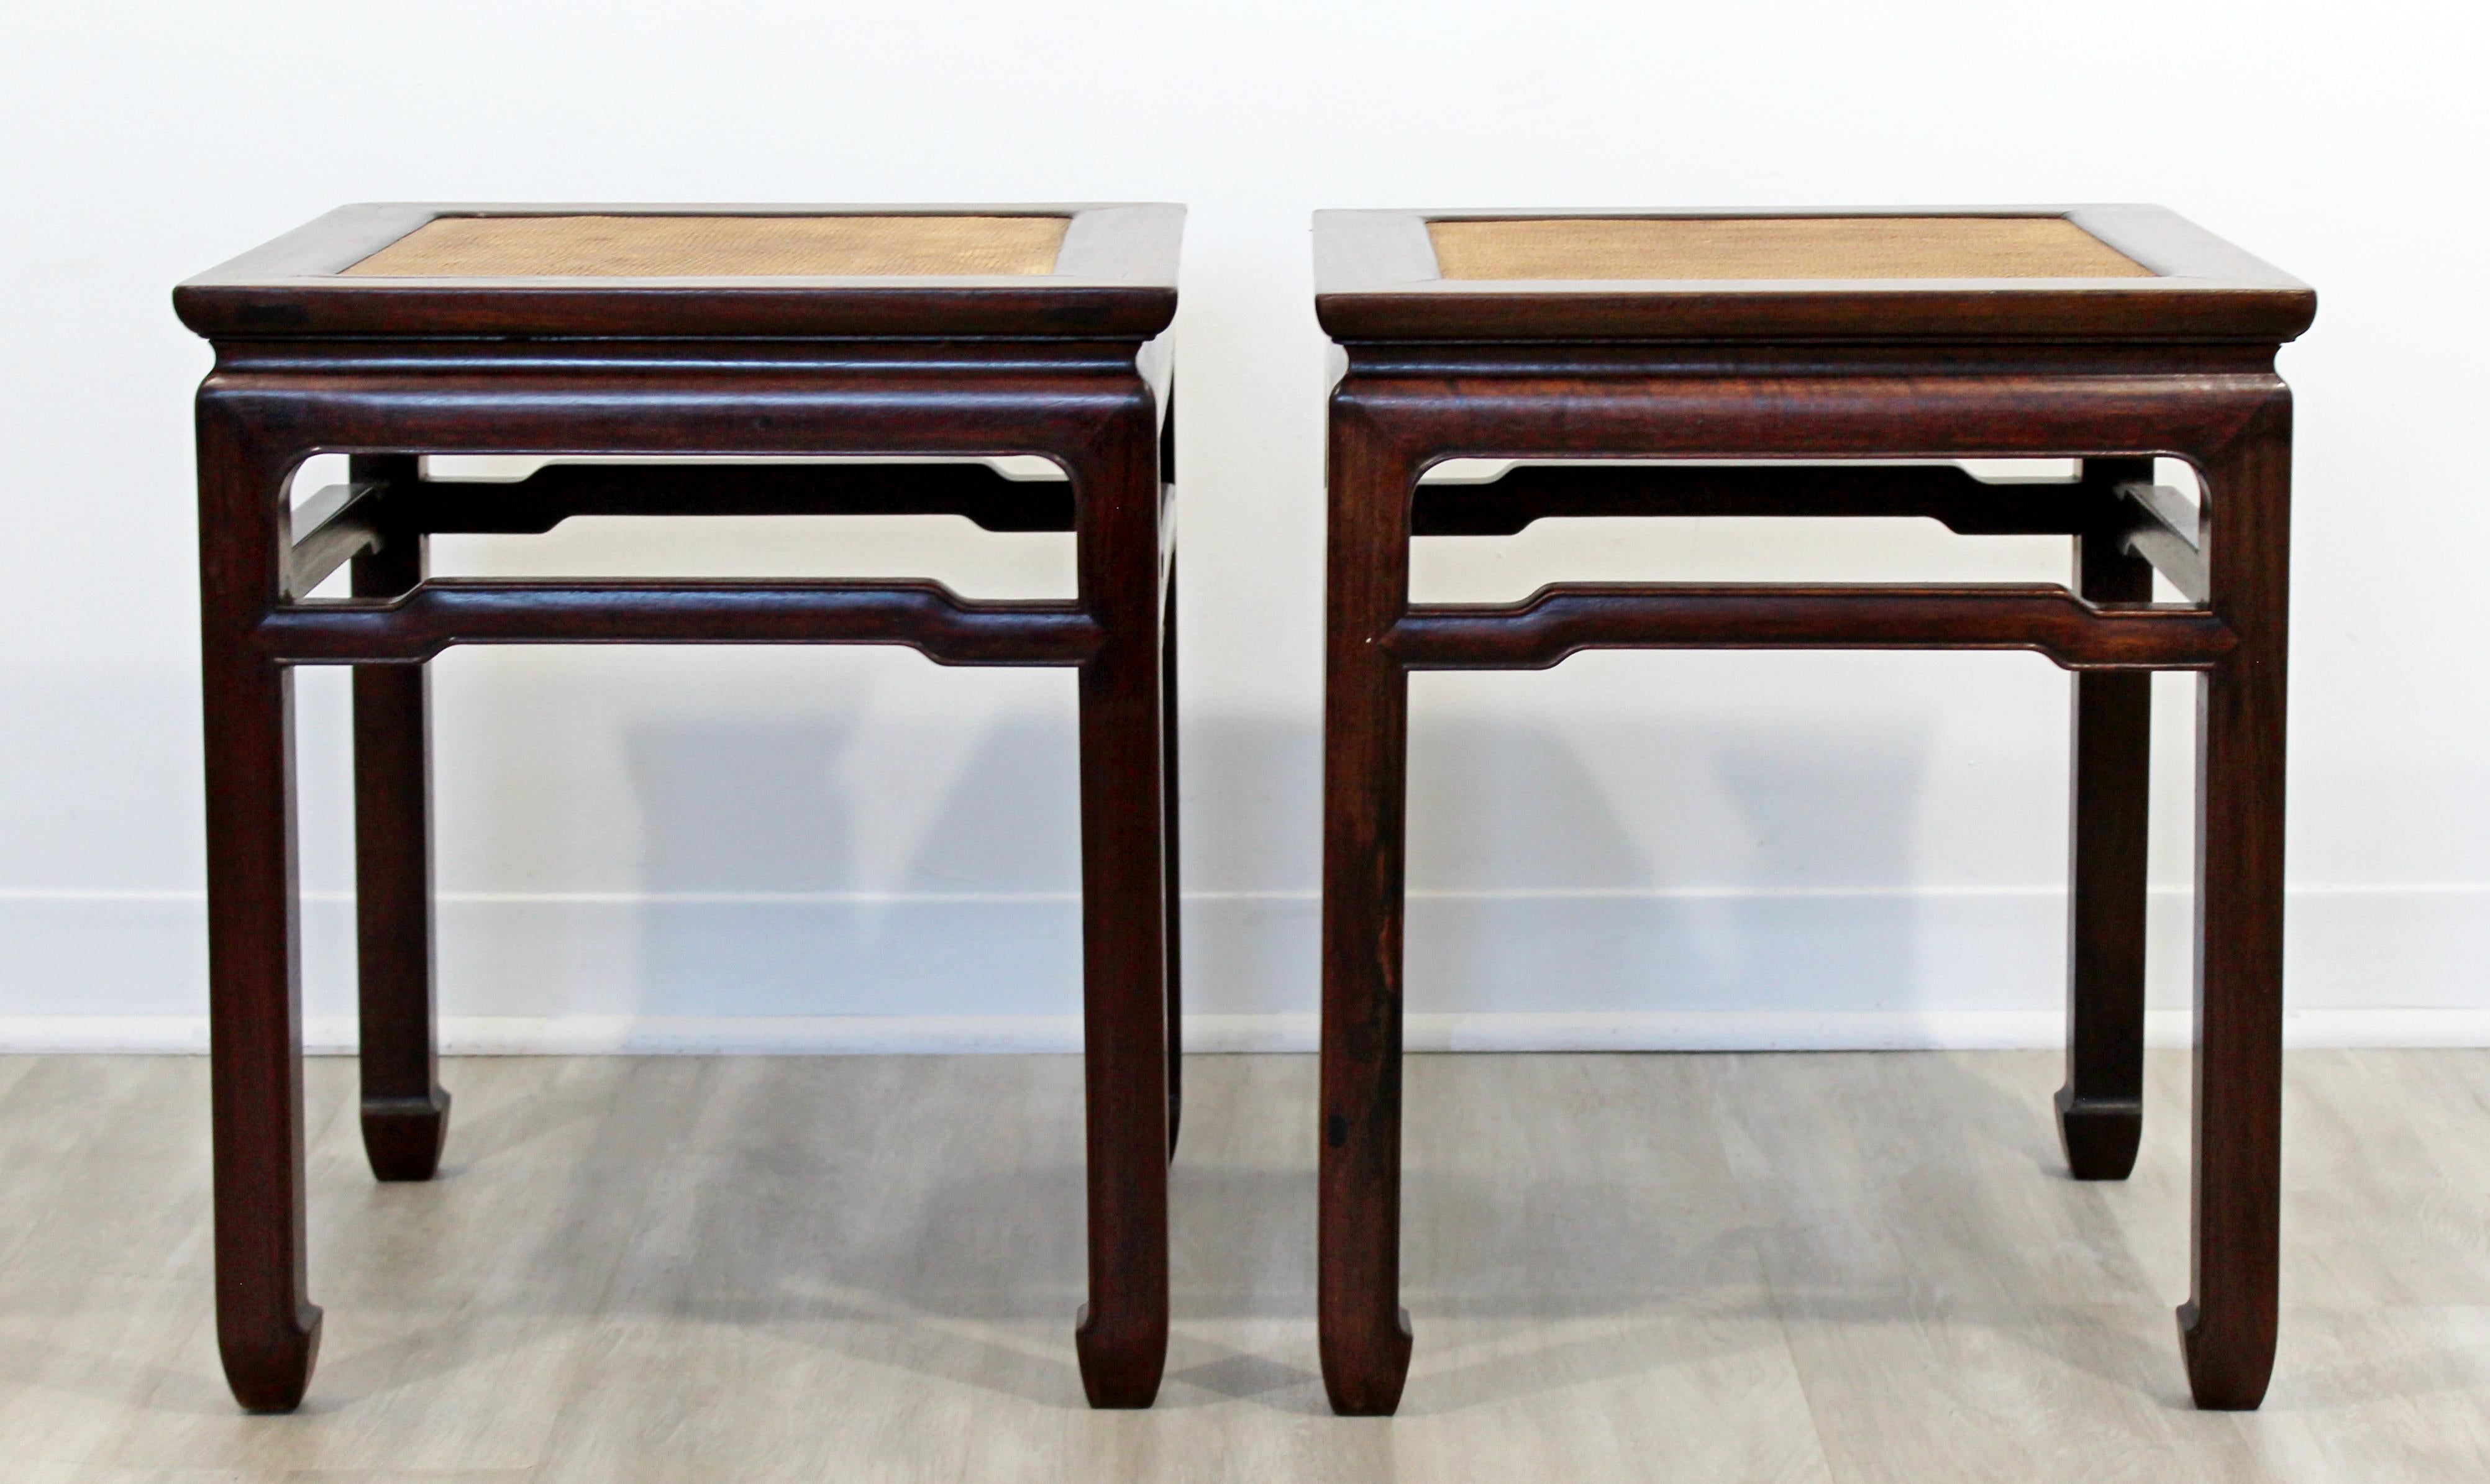 For your consideration is a stunning pair of Oriental style side or end tables, with cane tops. In good vintage condition. The dimensions are 17.25